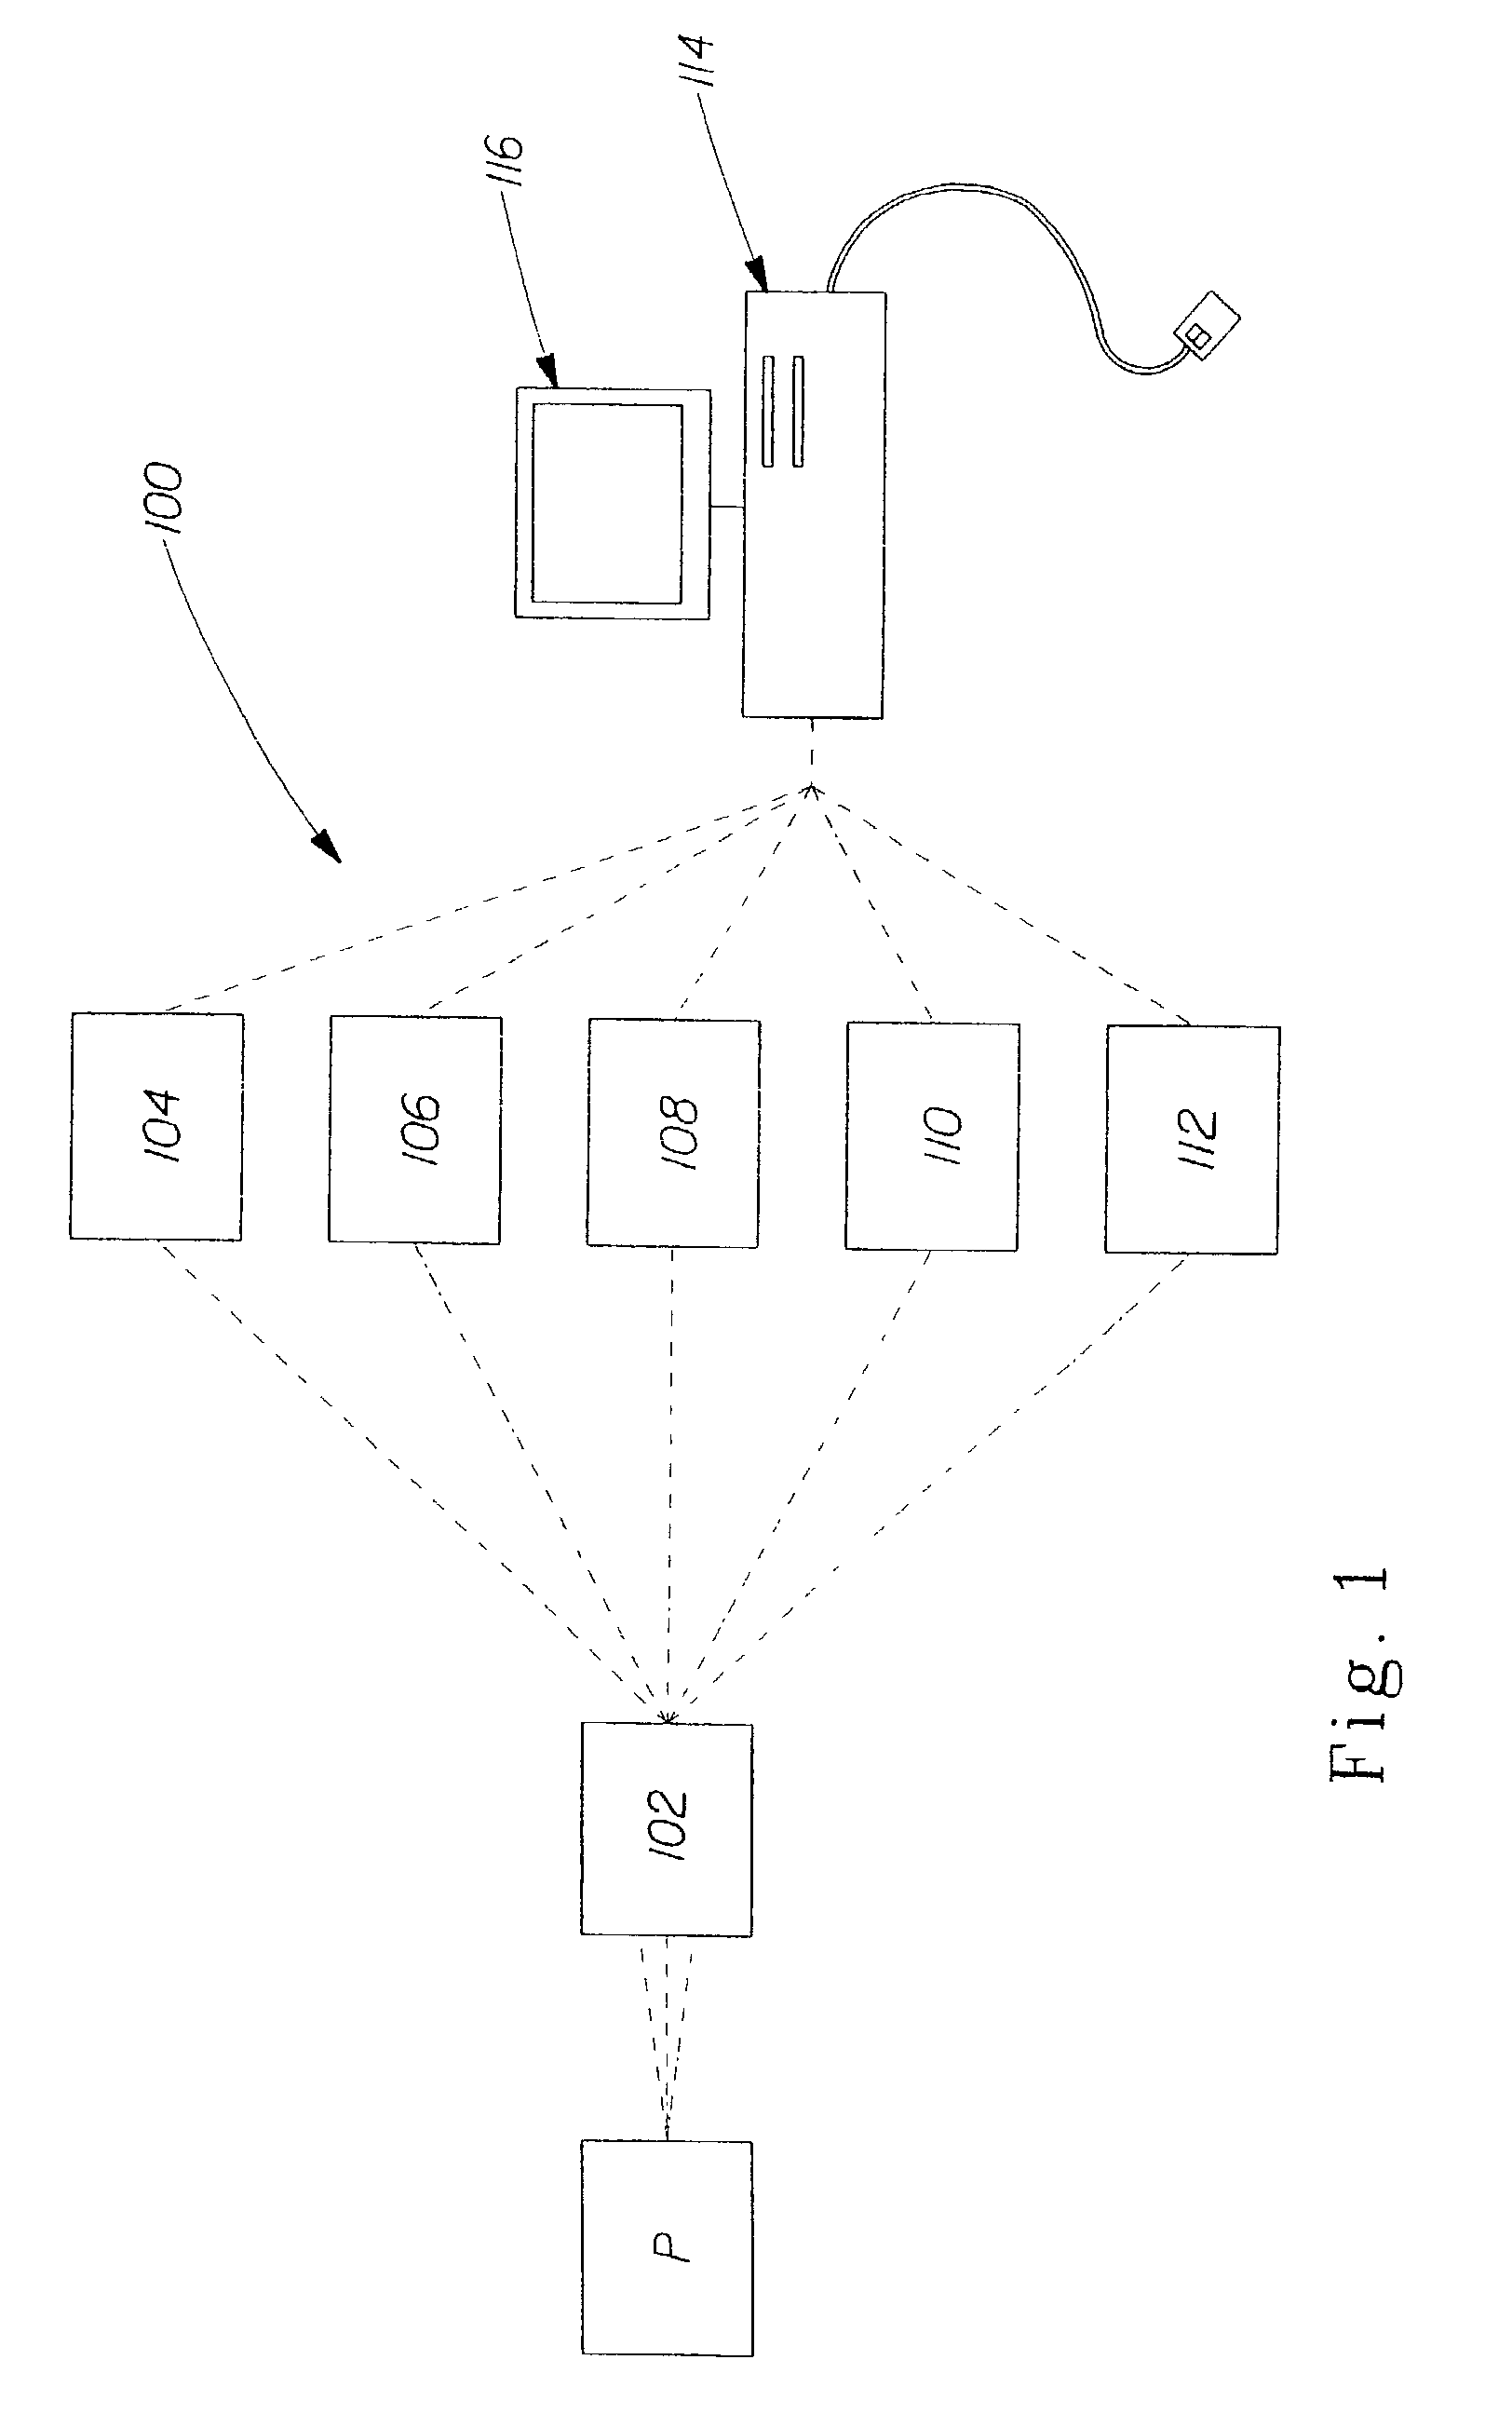 Apparatus and method for the detection and quantification of joint and tissue inflammation